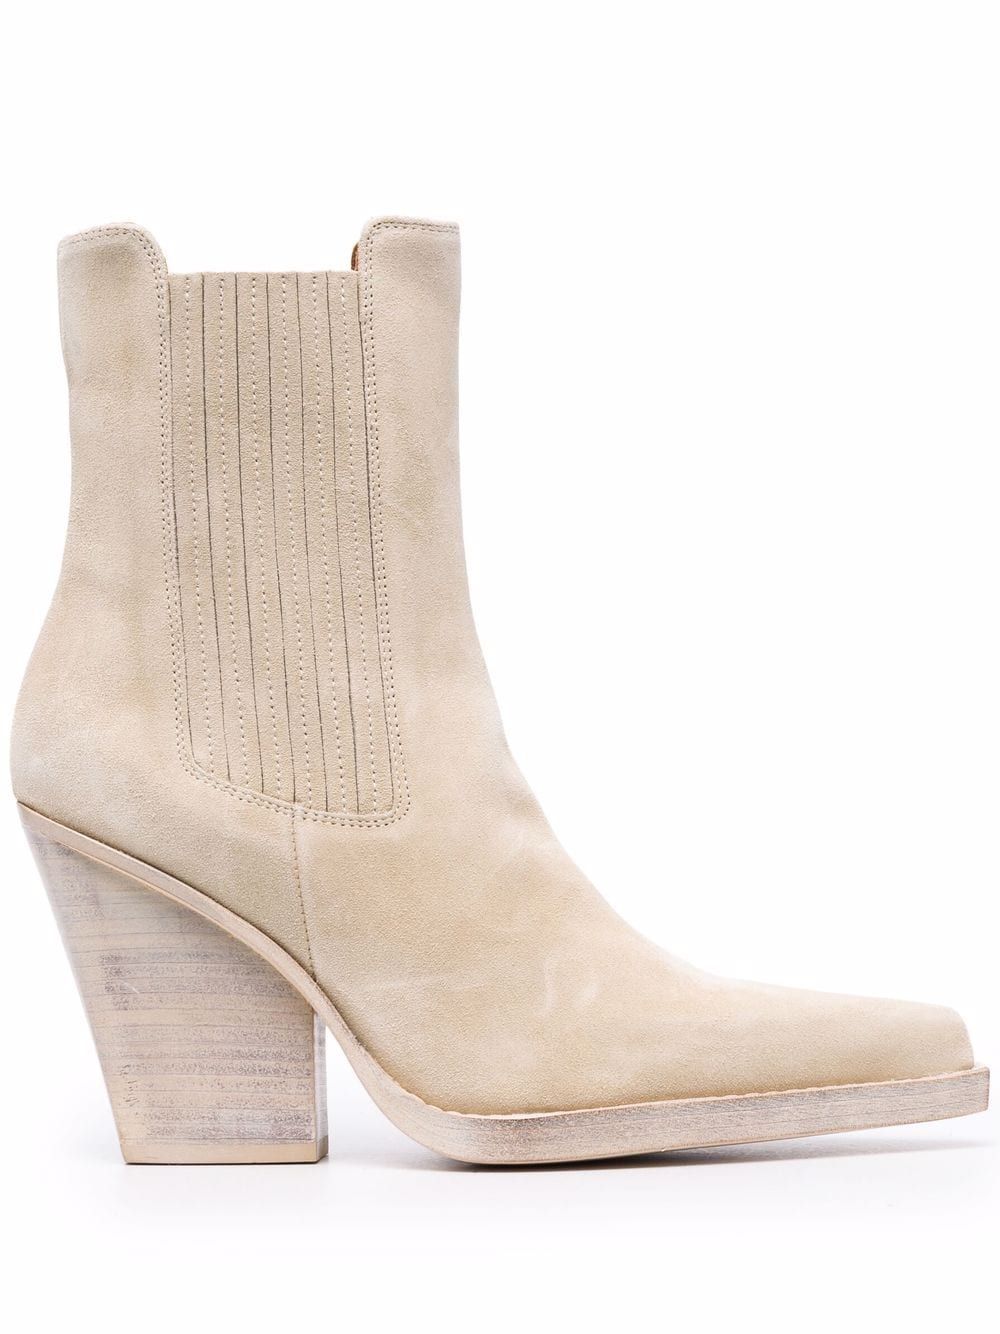 Dallas ankle boots | Farfetch Global